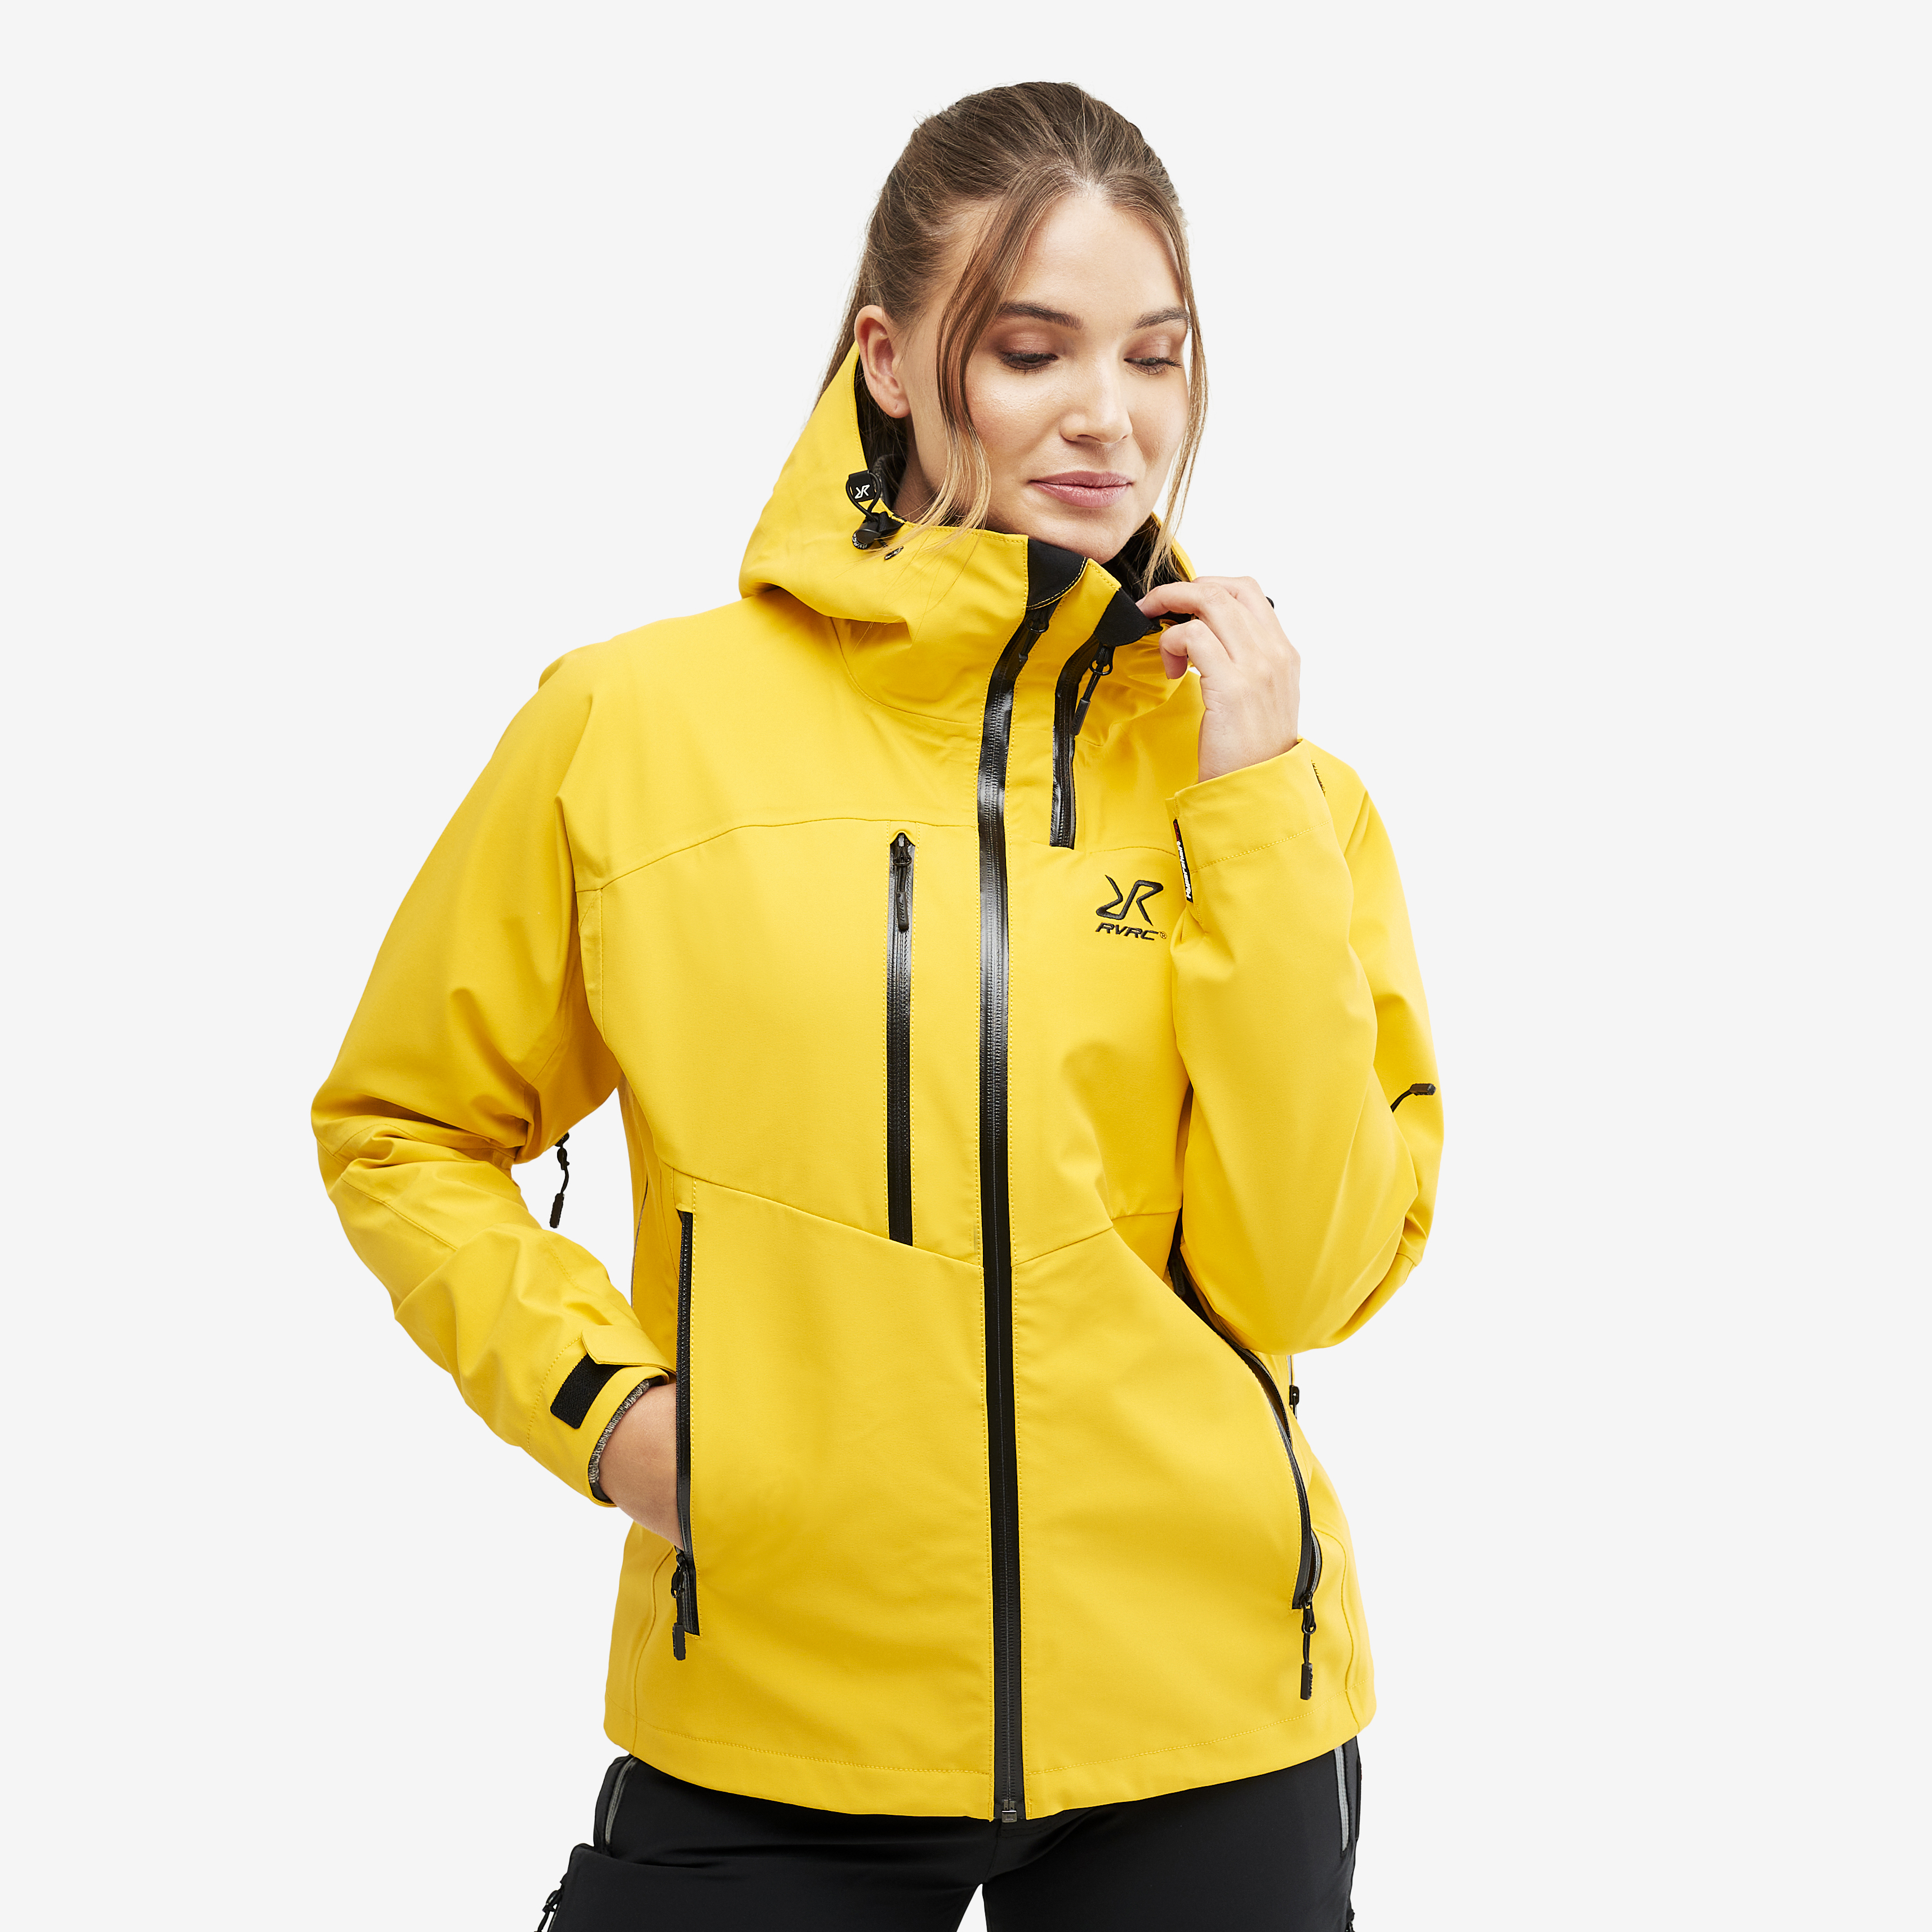 Cyclone Rescue Jacket 2.0 Yellow Mujeres